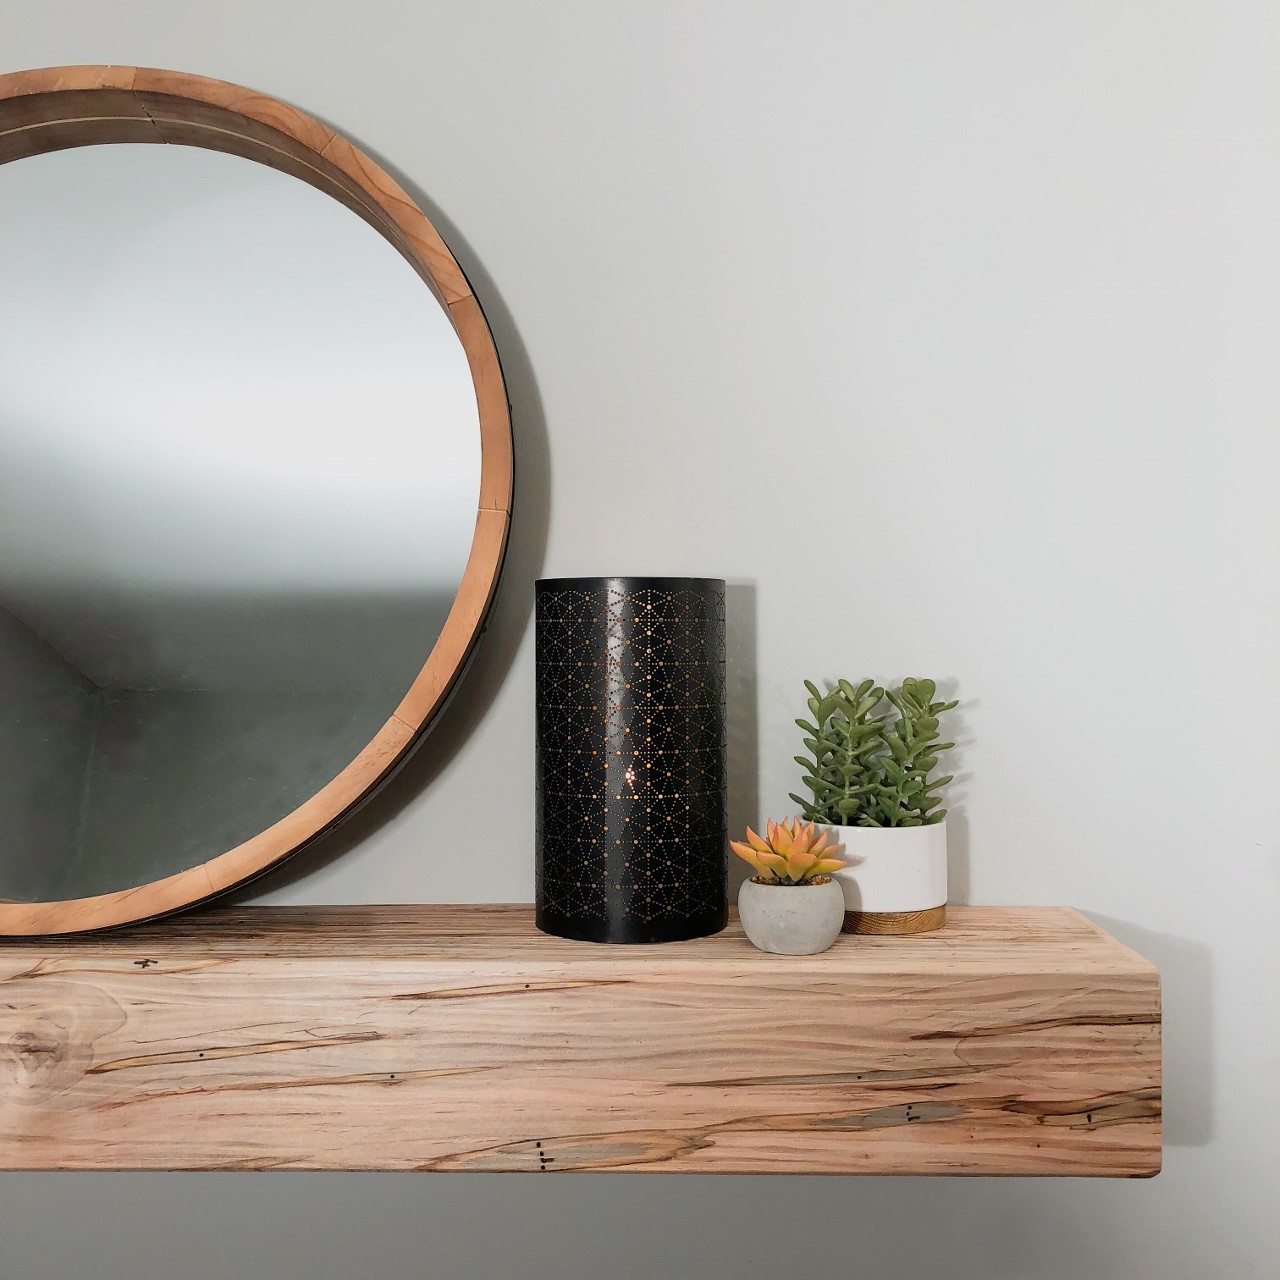 2020 Interior Design Trends Wood Meets Metals On The House